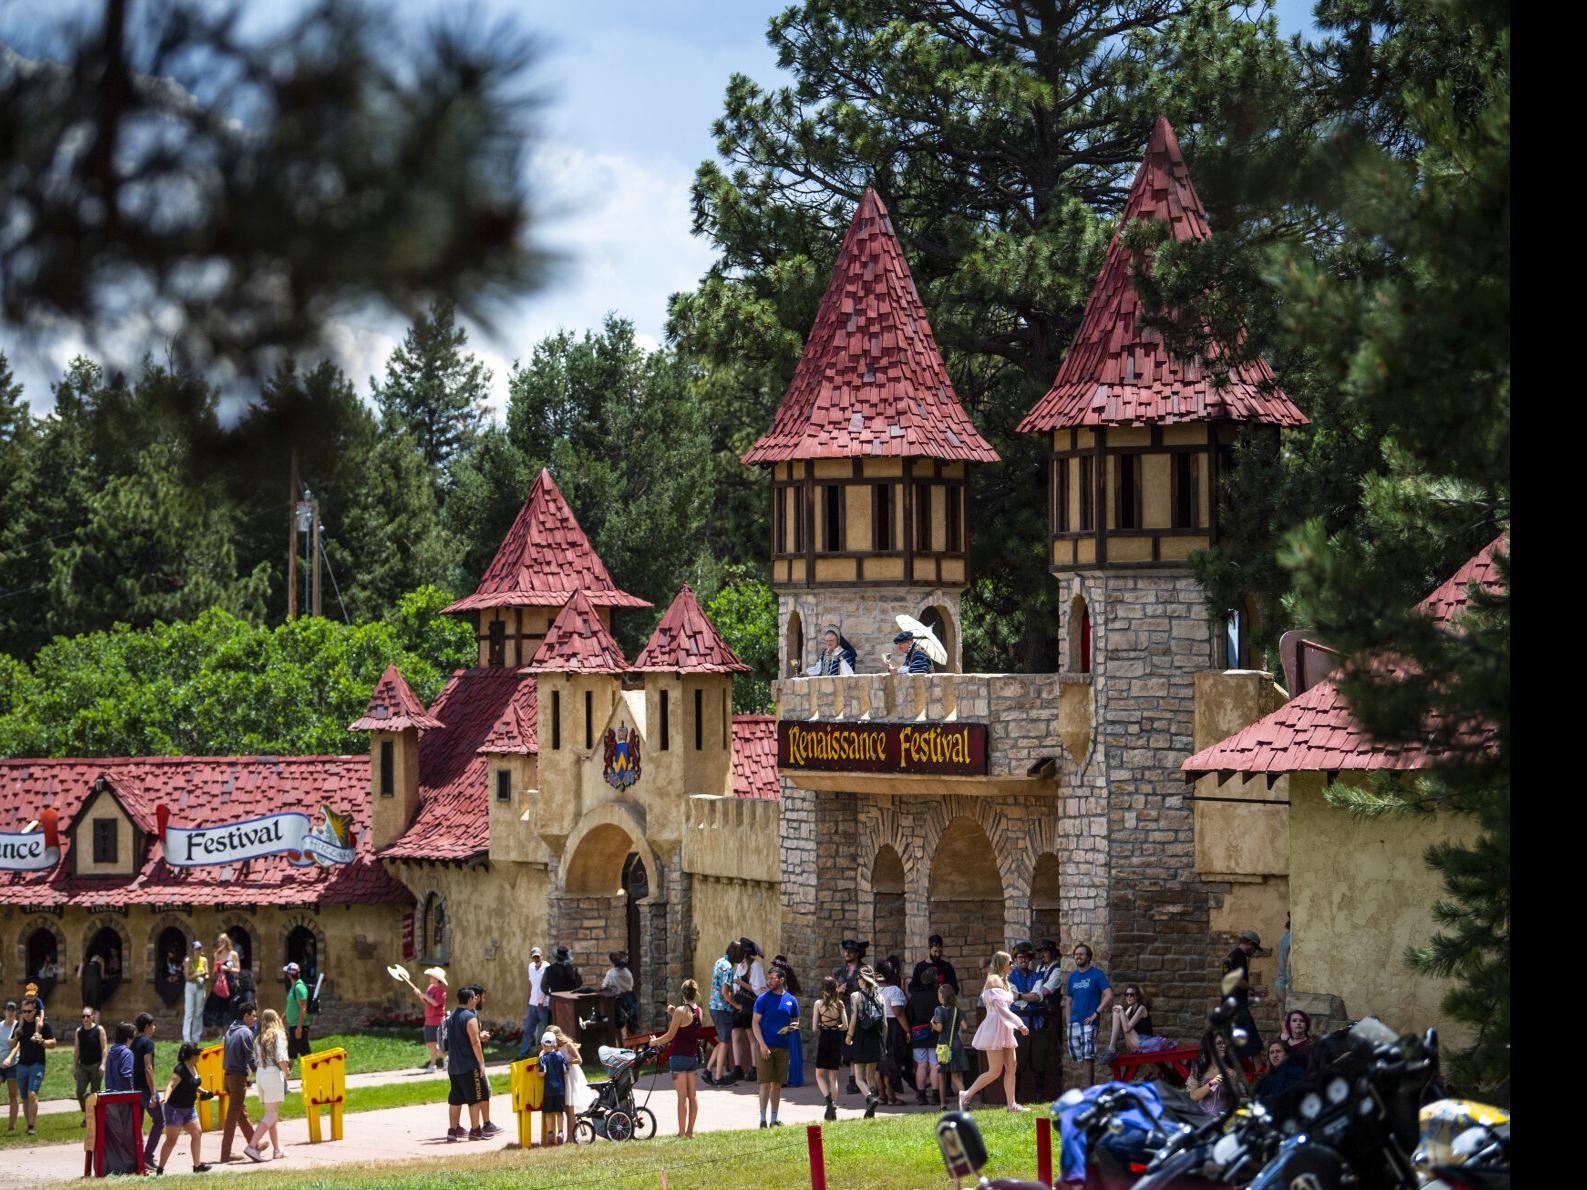 Colorado Renaissance Festival returns to Larkspur for 46th year